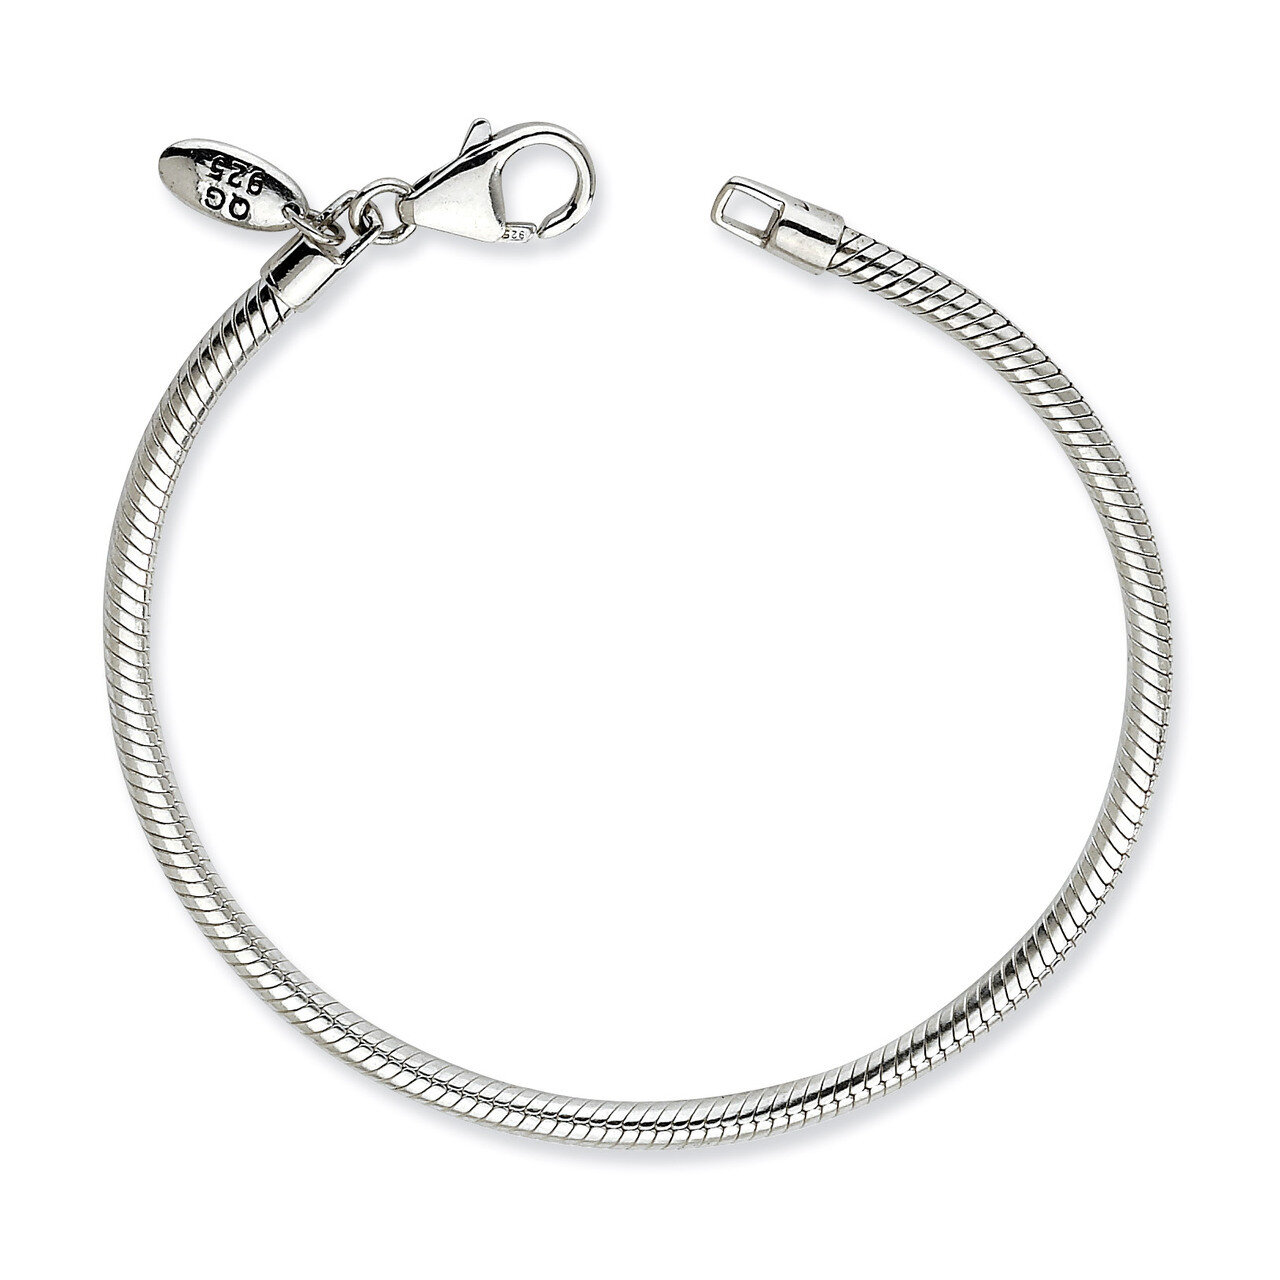 7.75 Inch Lobster Clasp Bead Bracelet - Sterling Silver QRS984-7.75